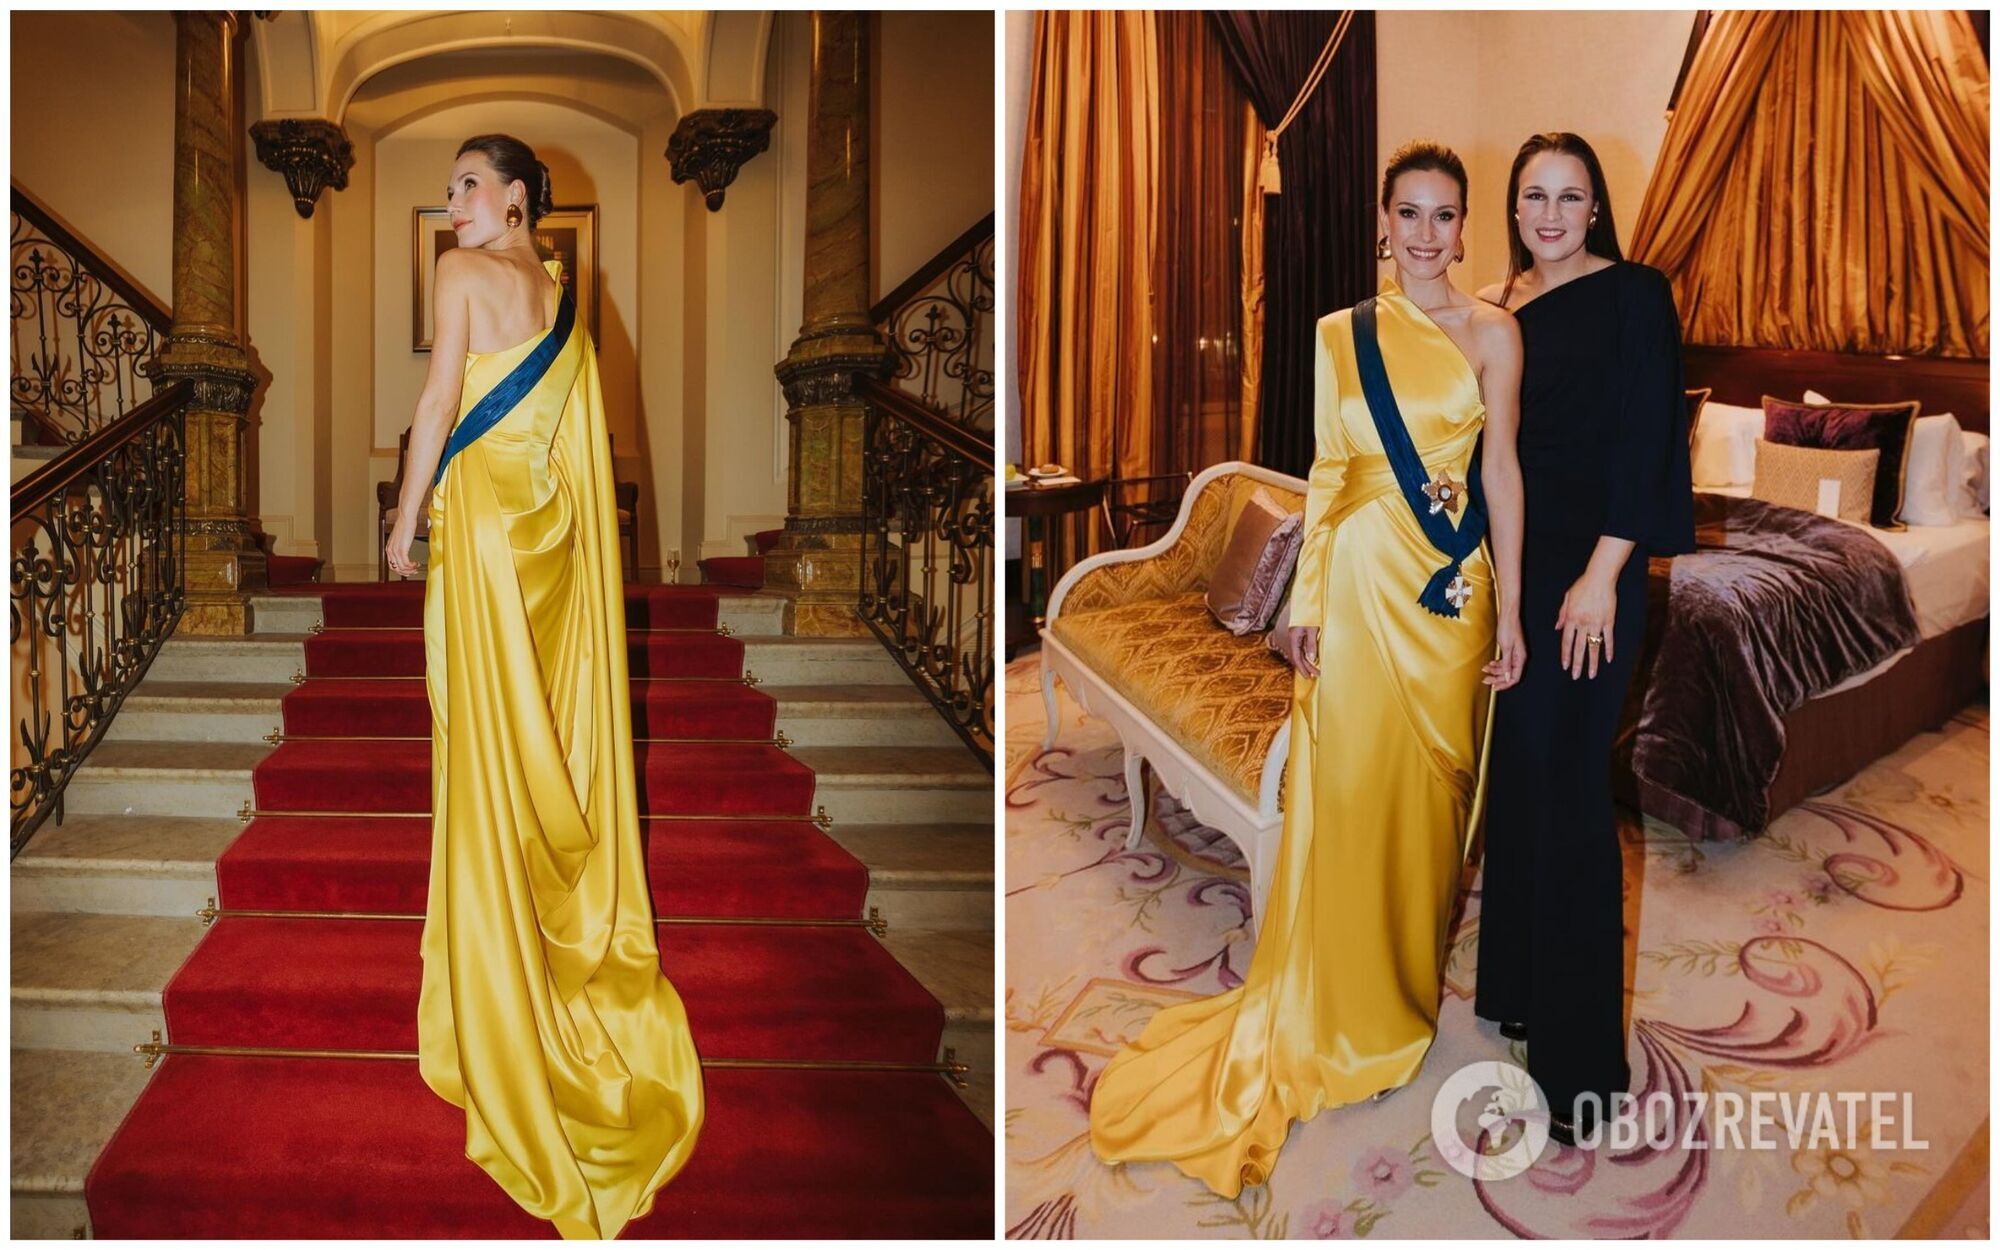 Finland's former prime minister Sanna Marin made a public appearance in a yellow and blue dress